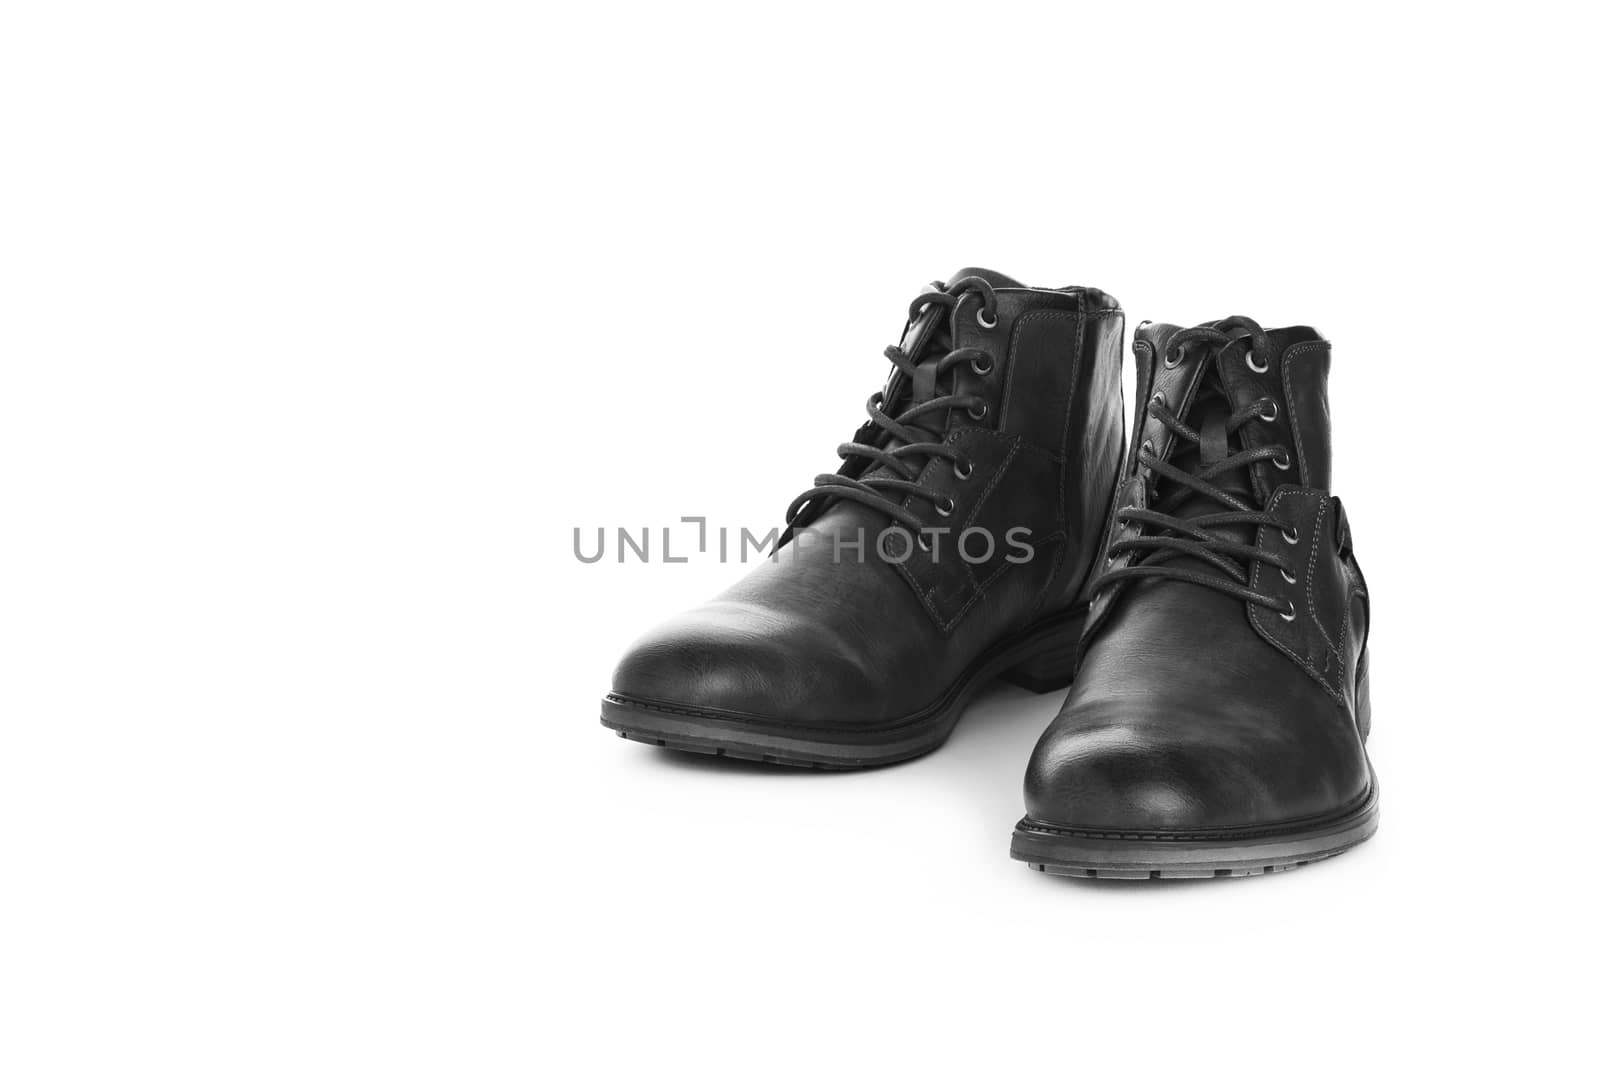 Men's shoes black casual. Isolated on white background by SlayCer